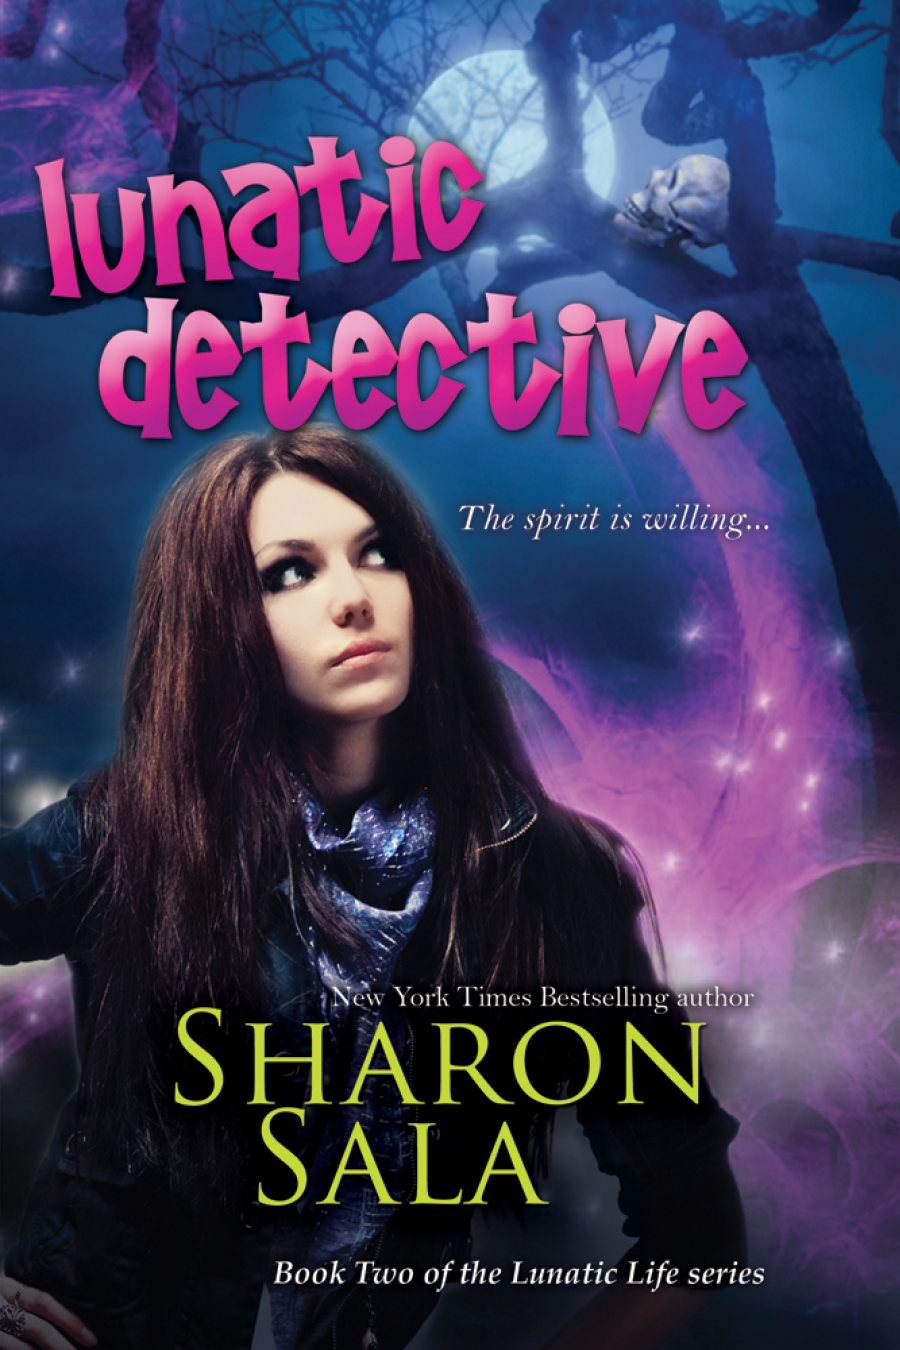 The Lunatic Detective (2011) by Sharon Sala